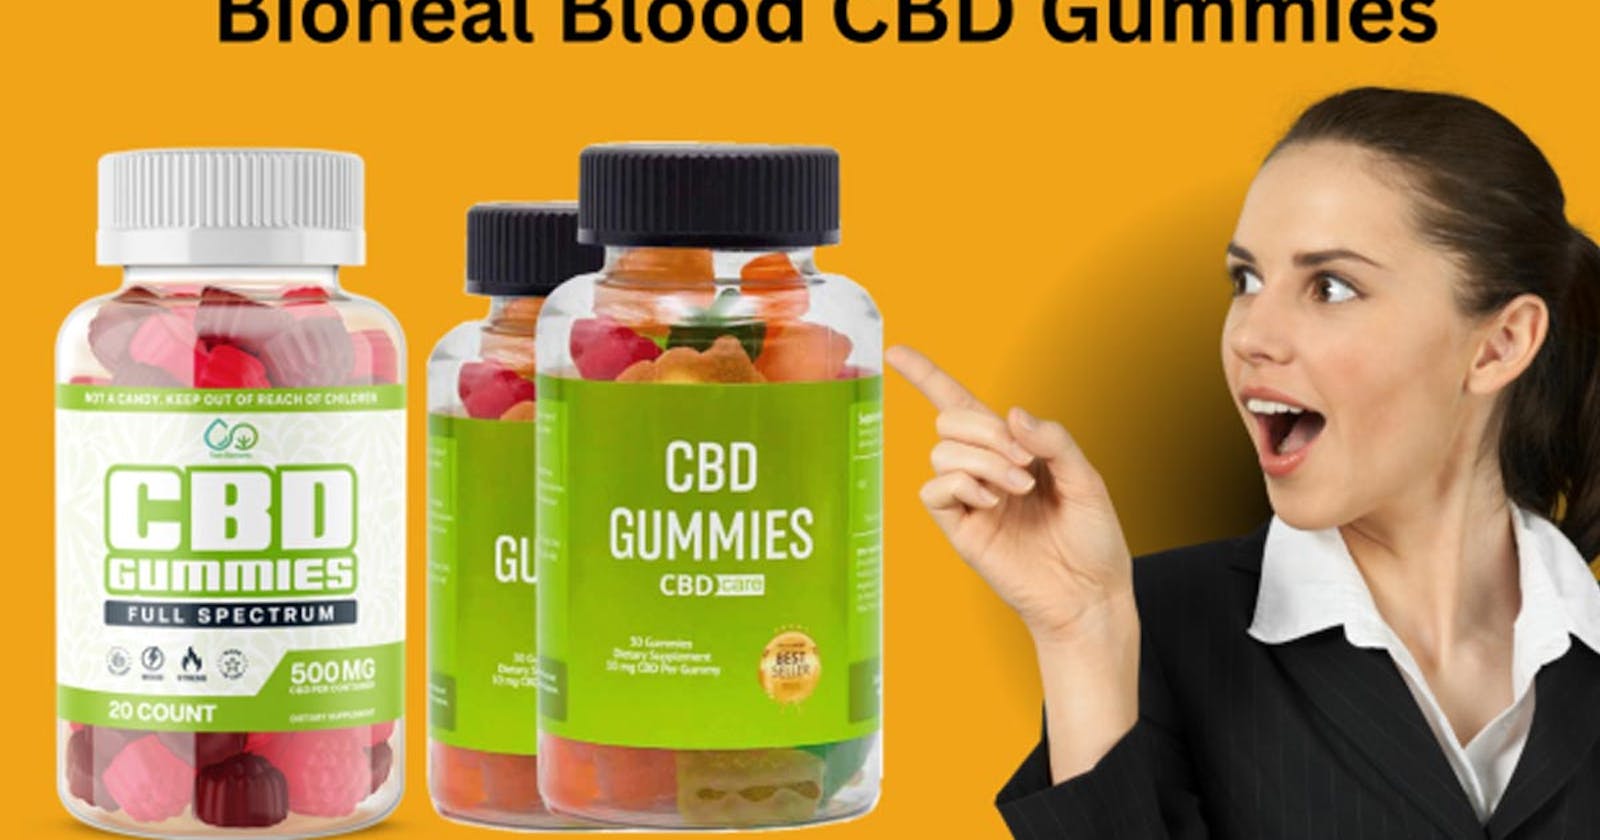 BioHeal CBD Gummies Gives You More Energy Or Just A Hoax!